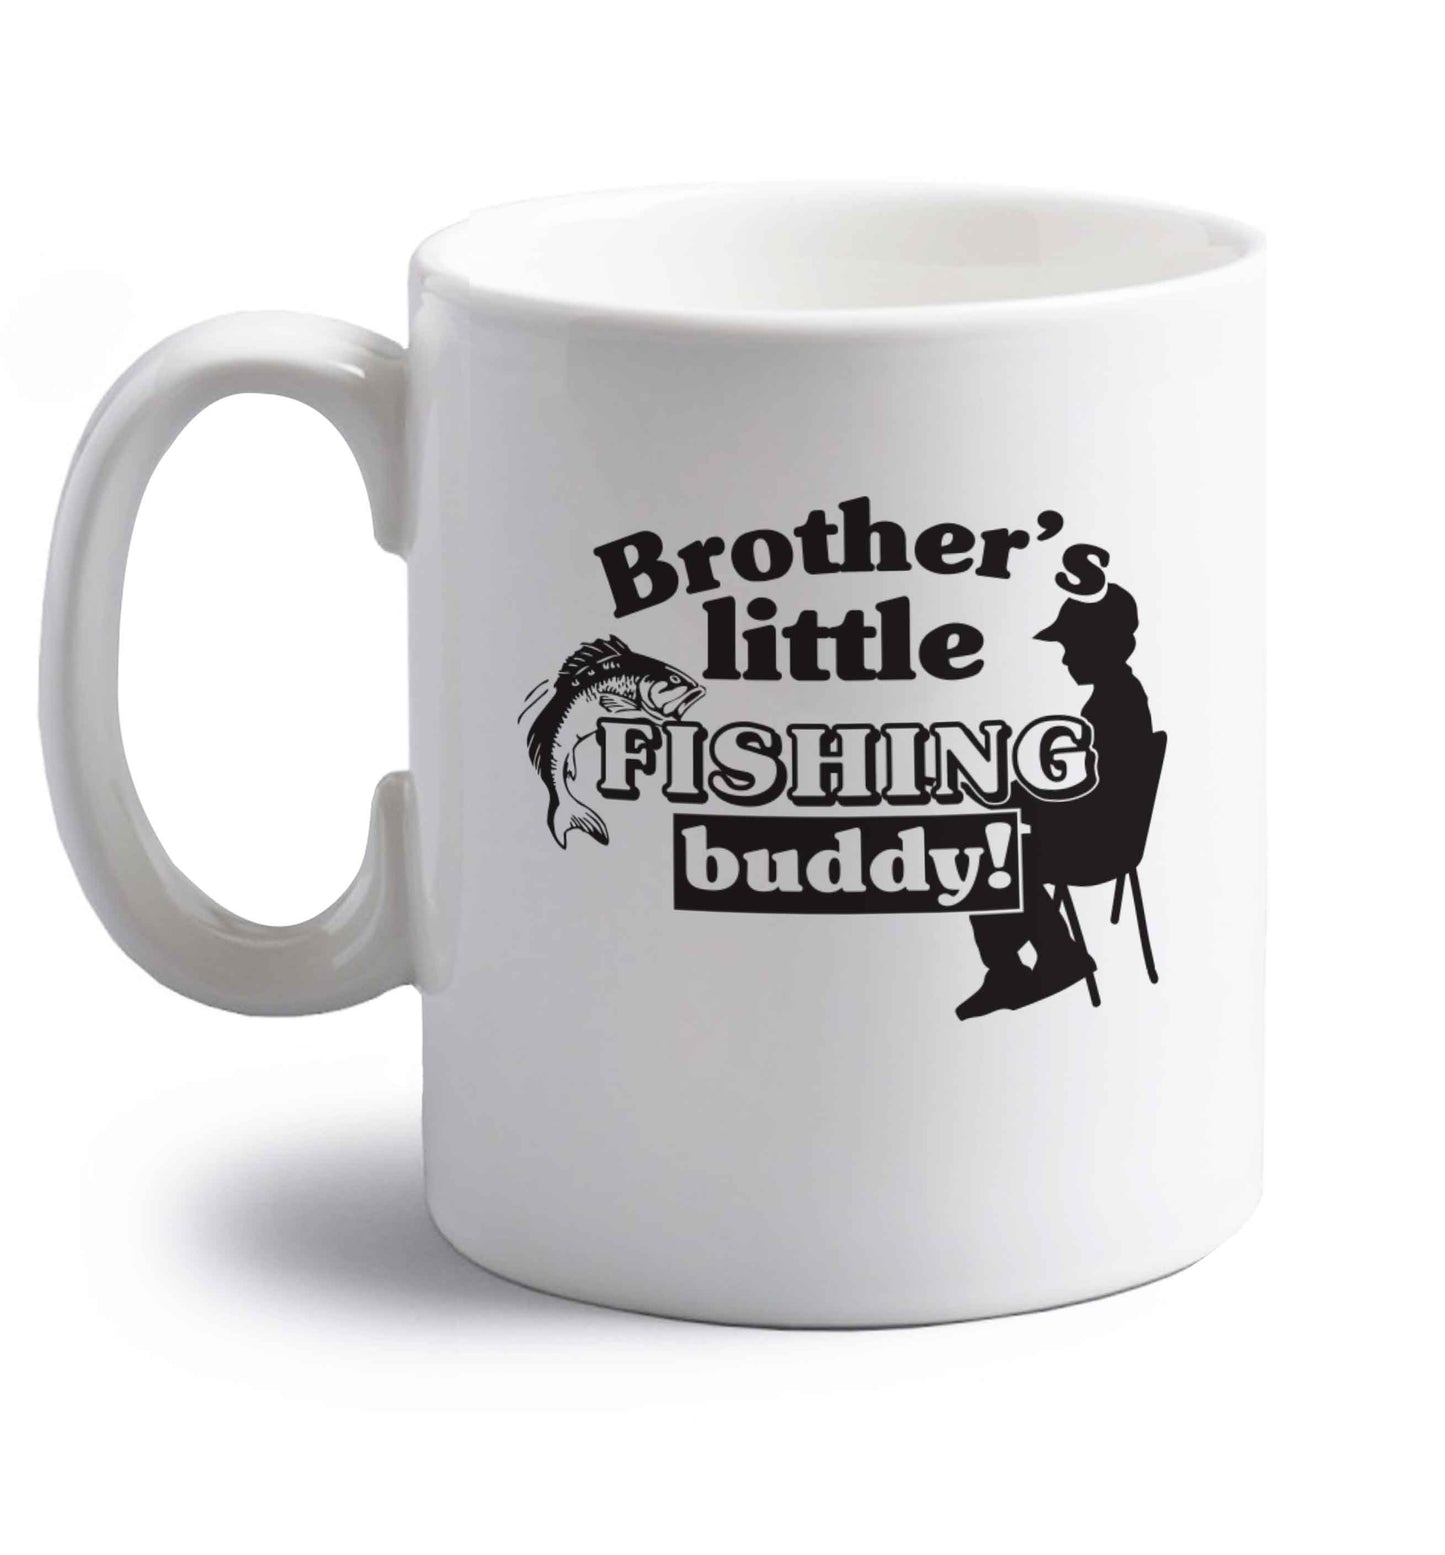 Brother's little fishing buddy right handed white ceramic mug 